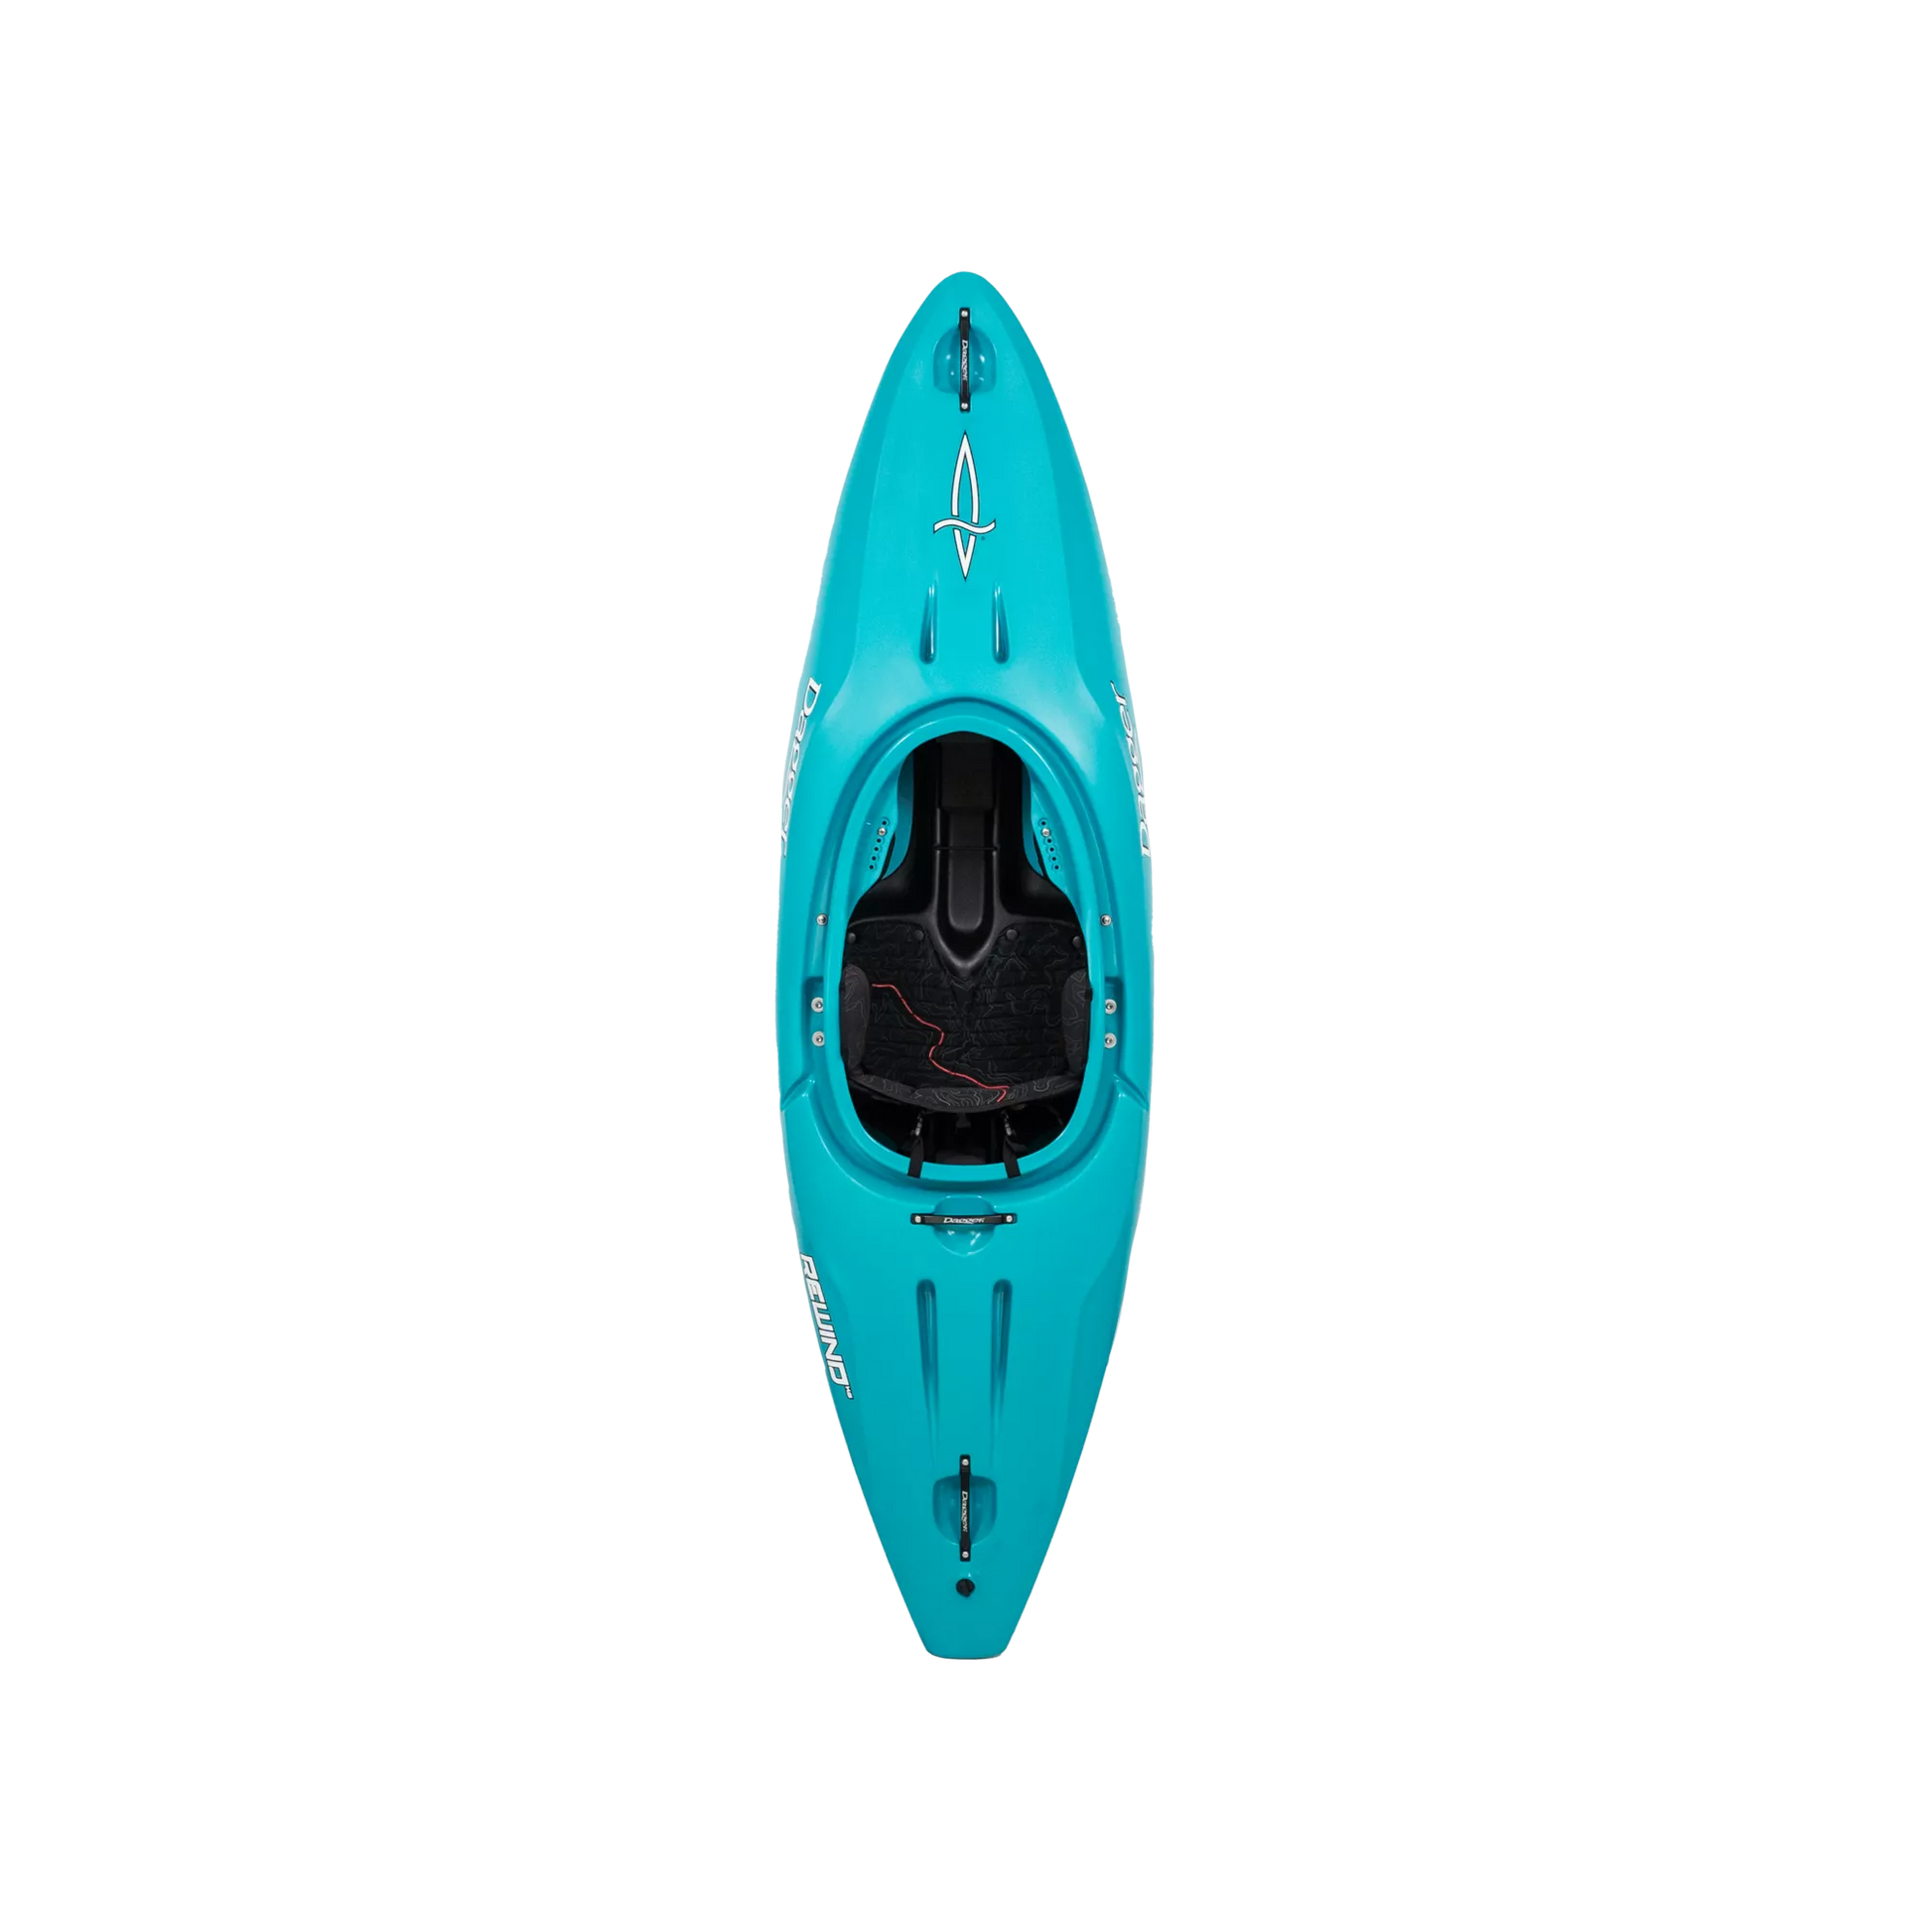 A Dagger Rewind XS whitewater kayak with its paddles laid out horizontally on a black background.